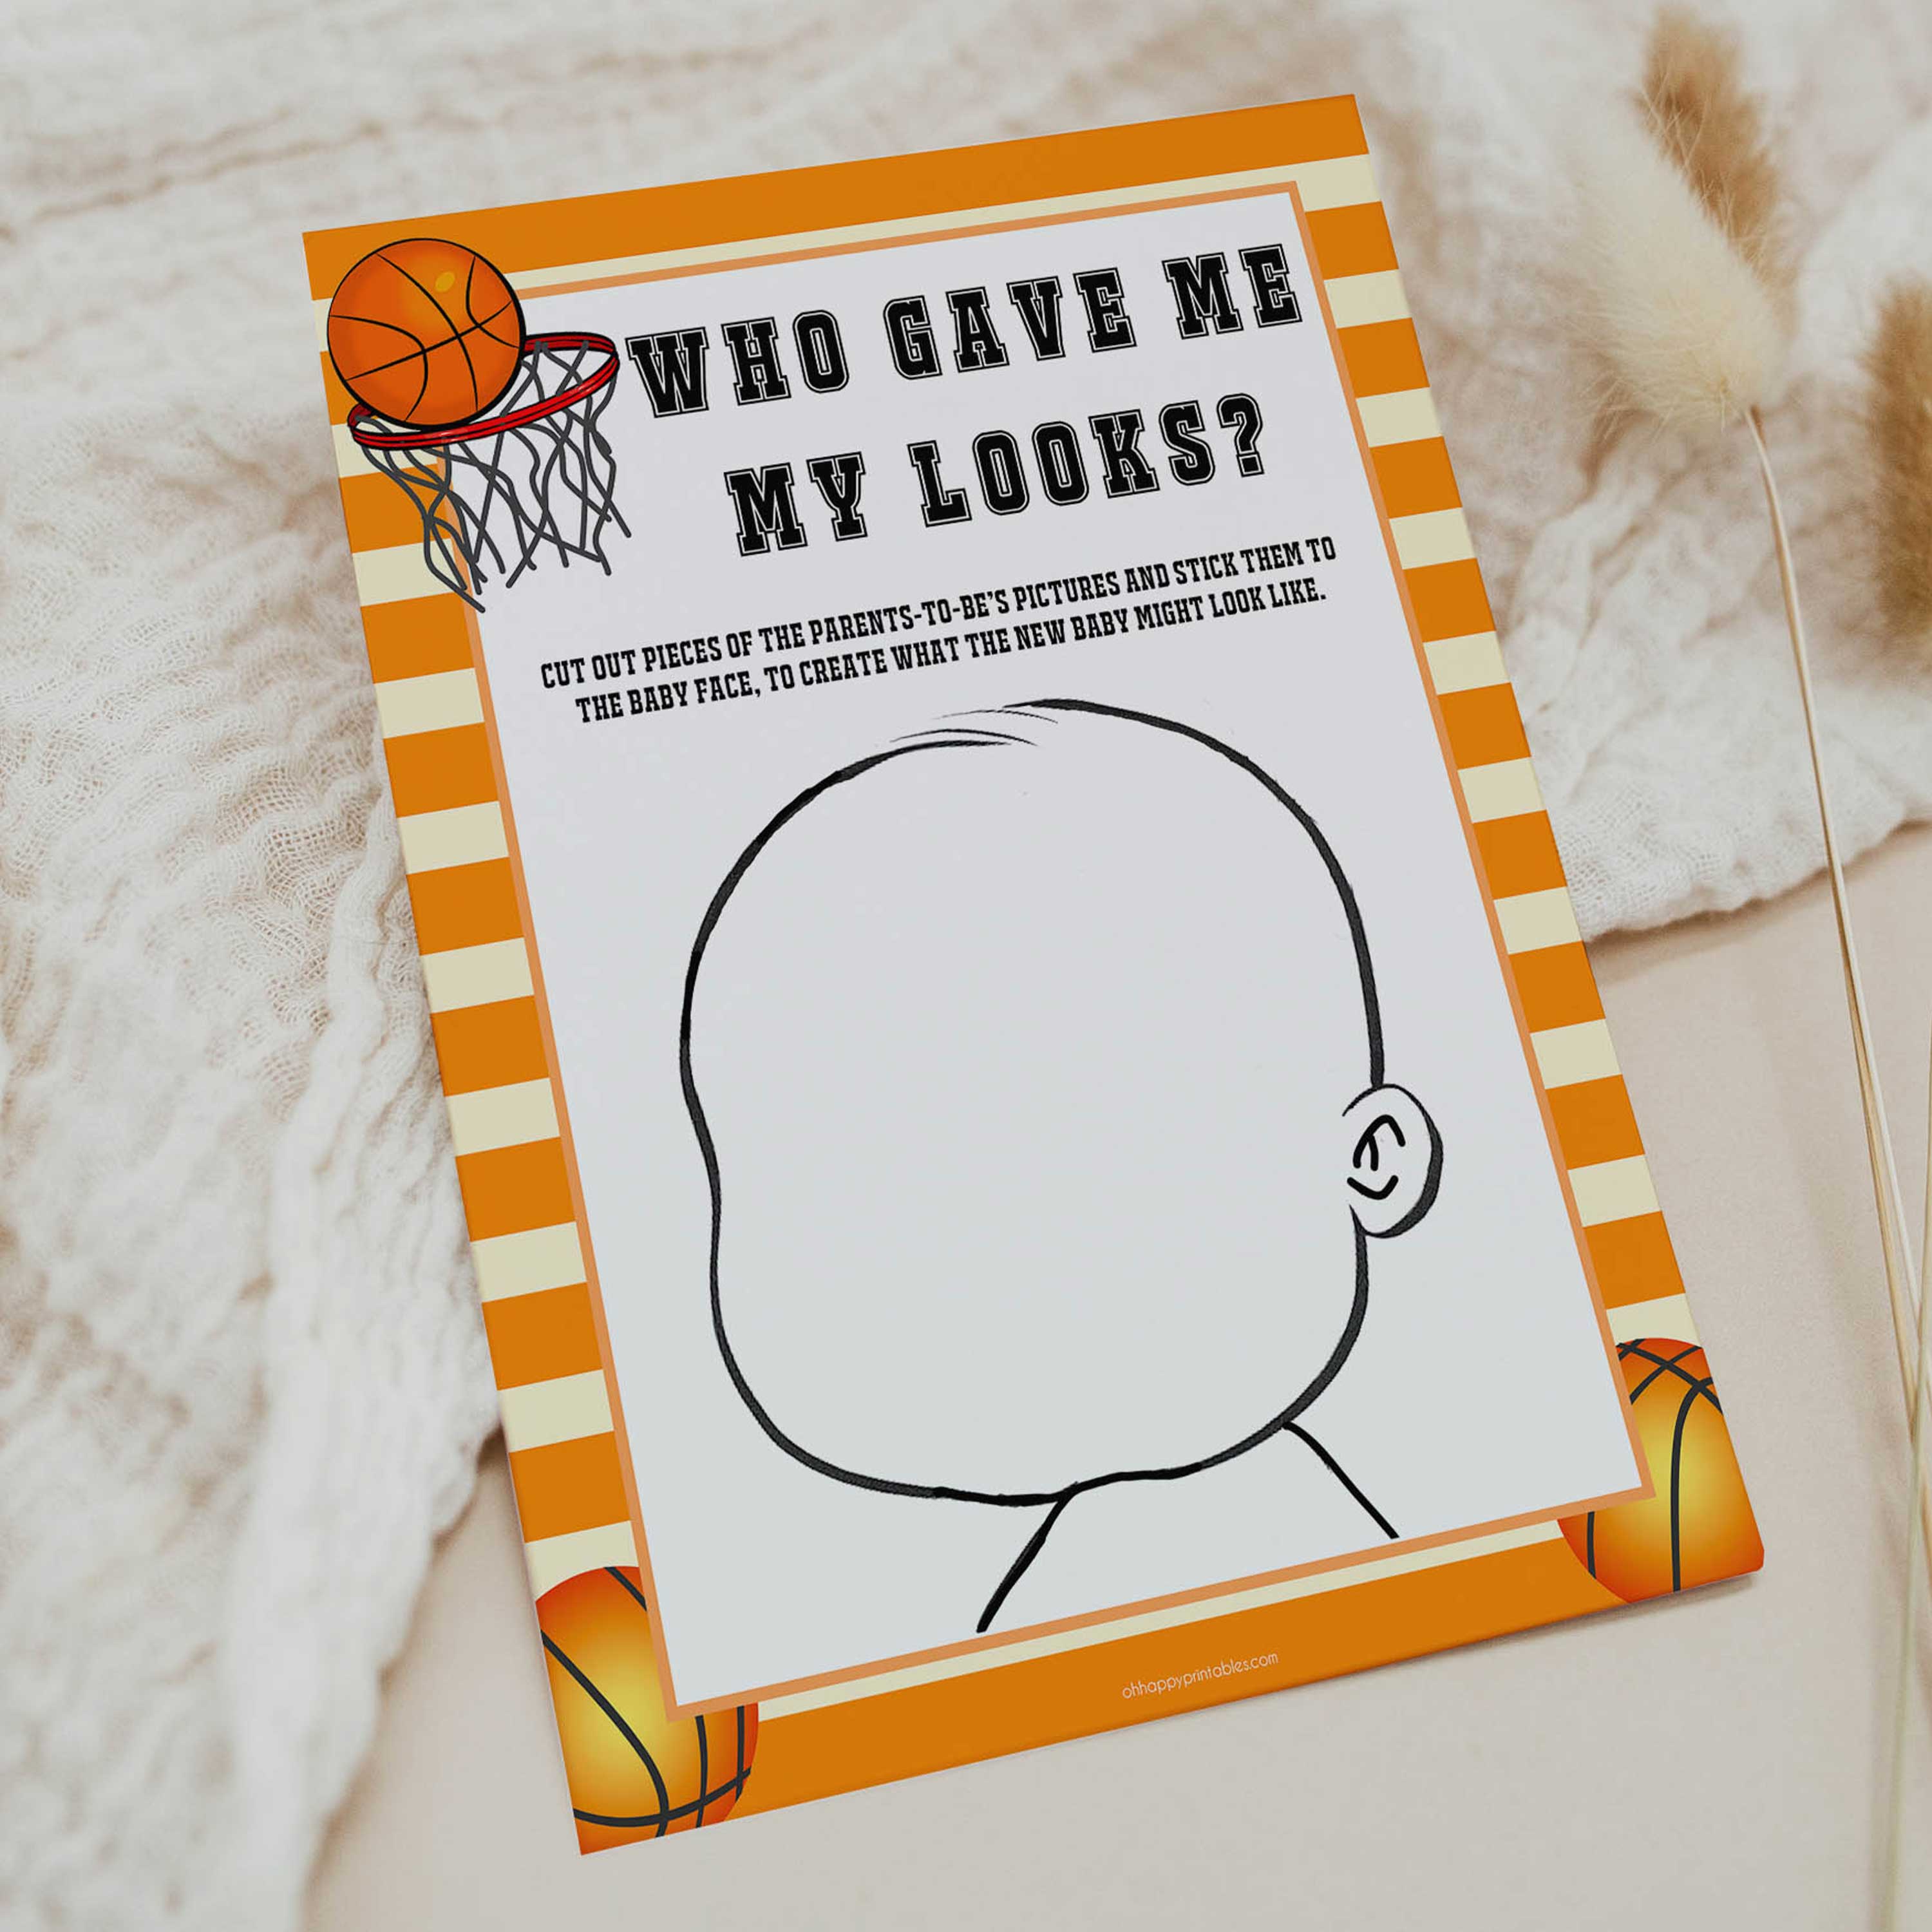 Basketball baby shower games, who gave me my looks baby game, printable baby games, basket baby games, baby shower games, basketball baby shower idea, fun baby games, popular baby games